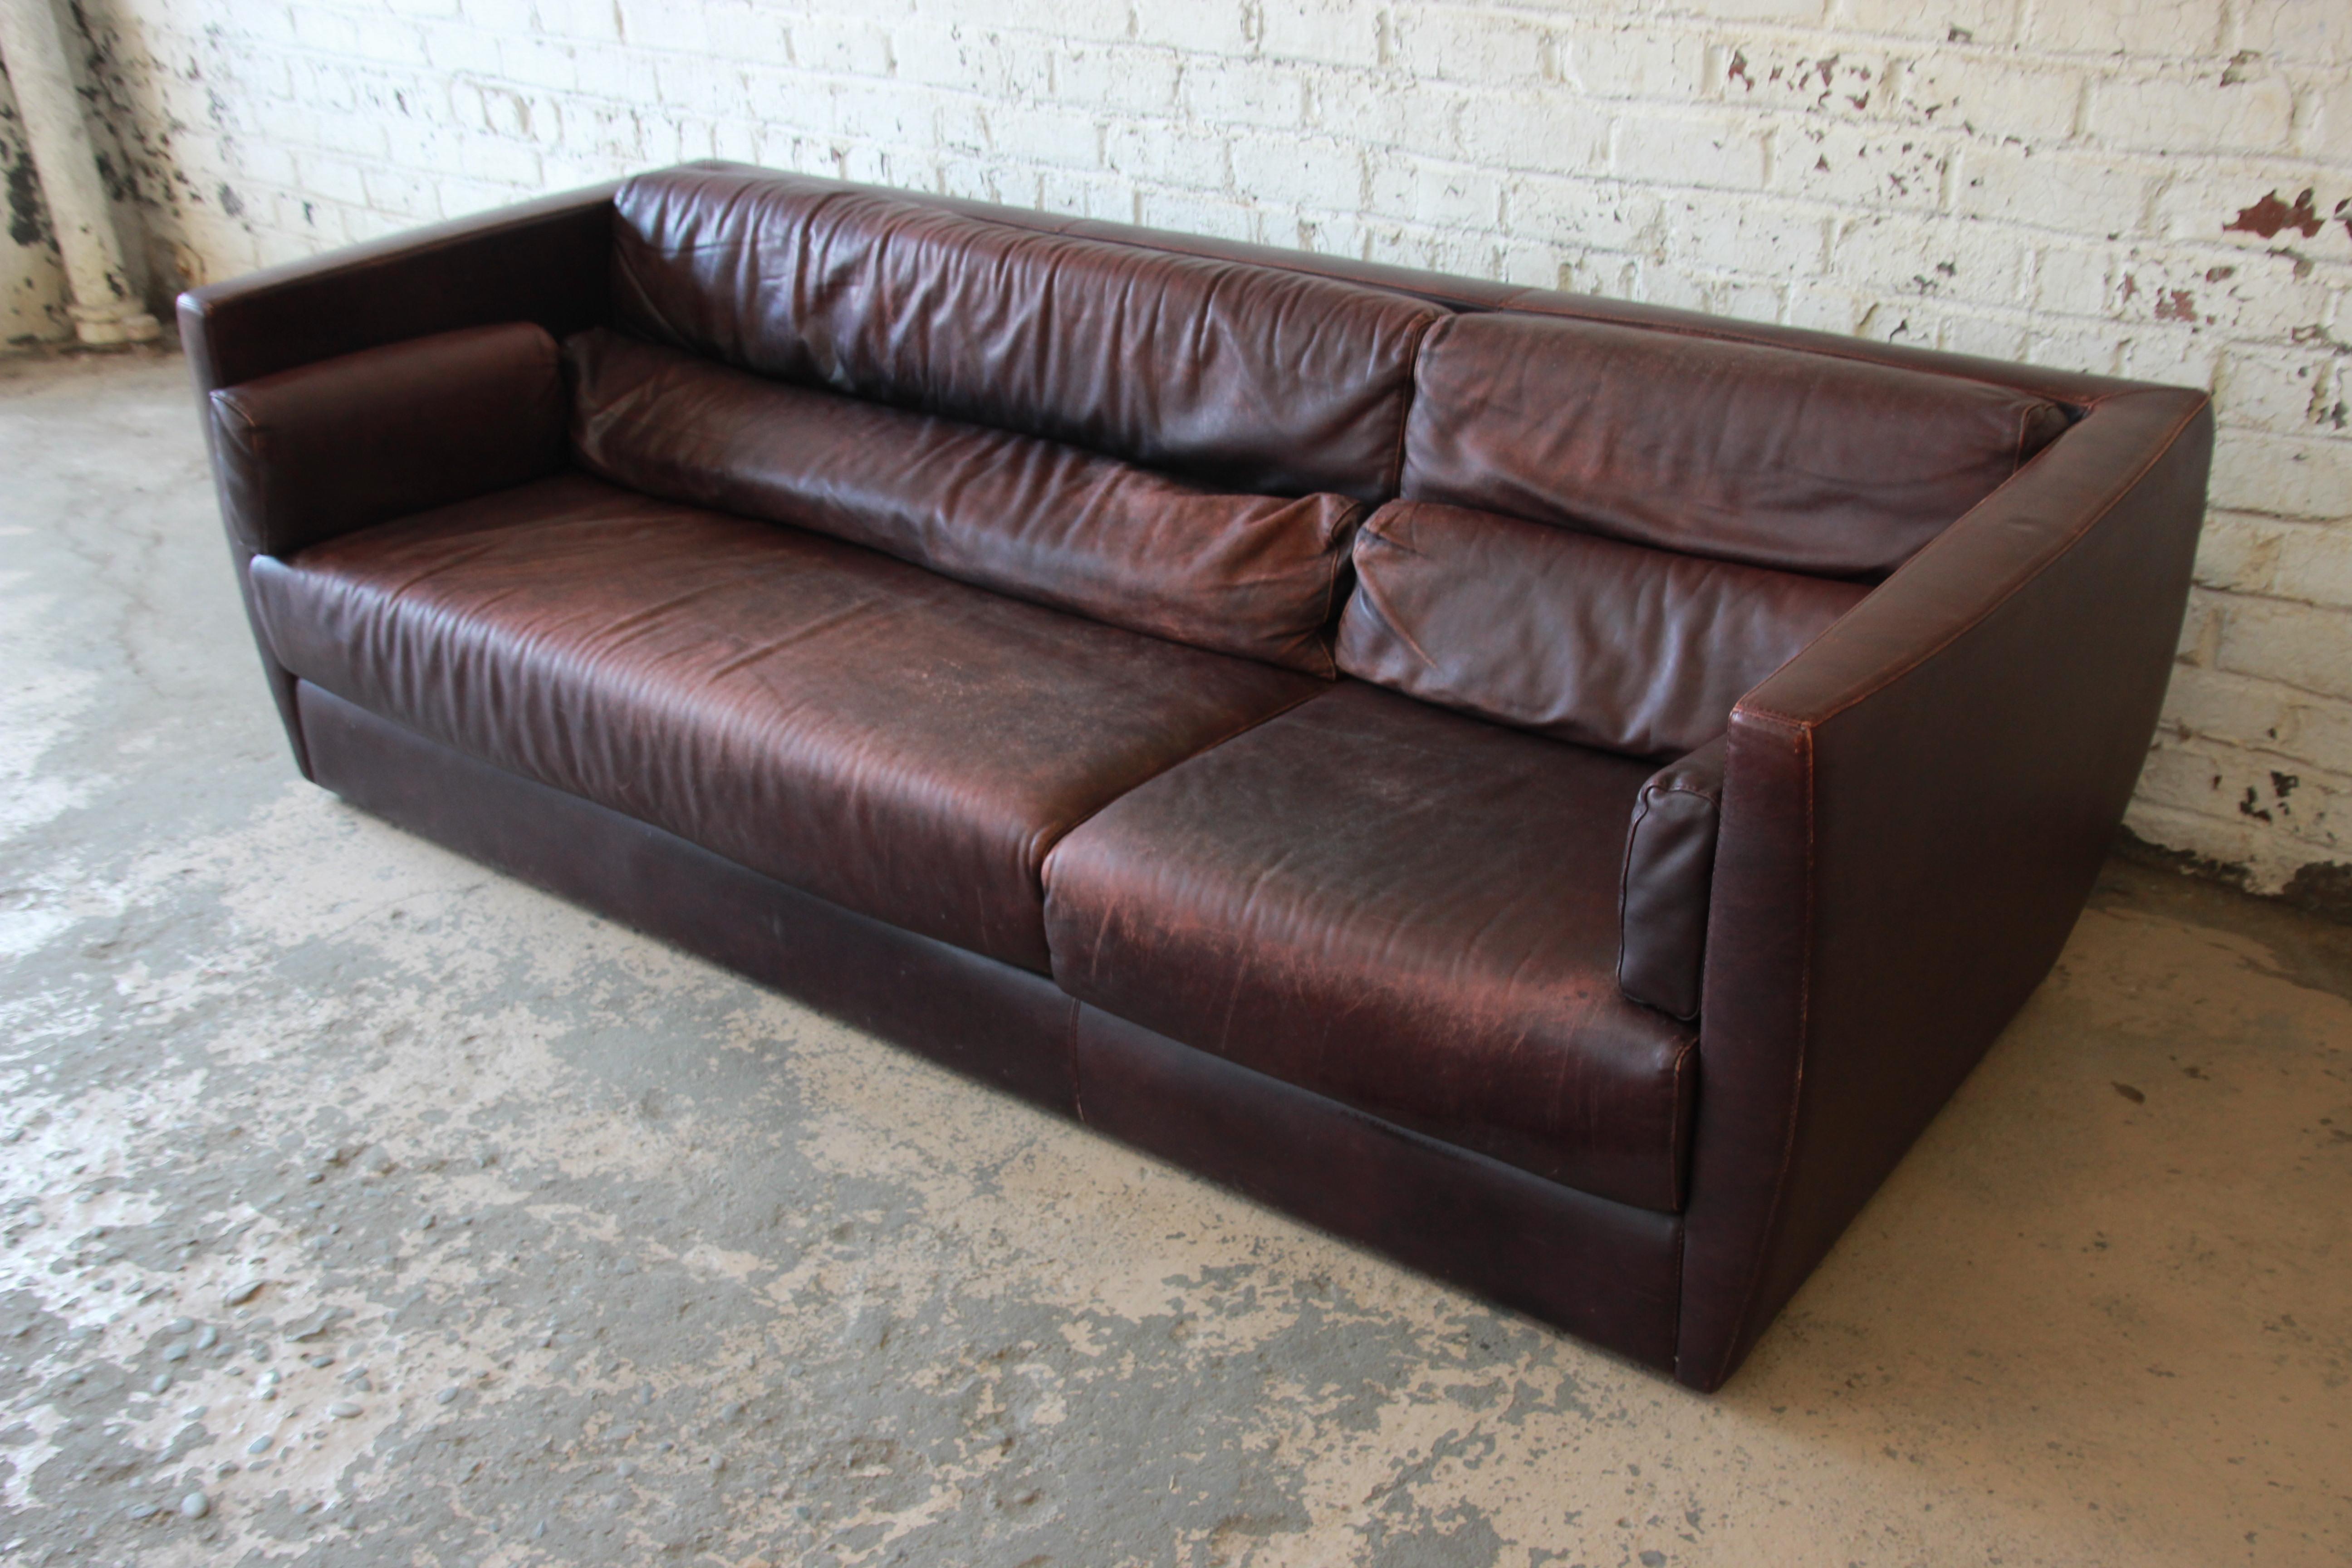 A gorgeous Bauhaus style leather sofa. The sofa was manufactured in Italy, circa 1970 by Tre Erre for Roche Bobois. It features gorgeous high-end leather in a deep burgundy, with a nice patina that only adds to the character and age of the piece.